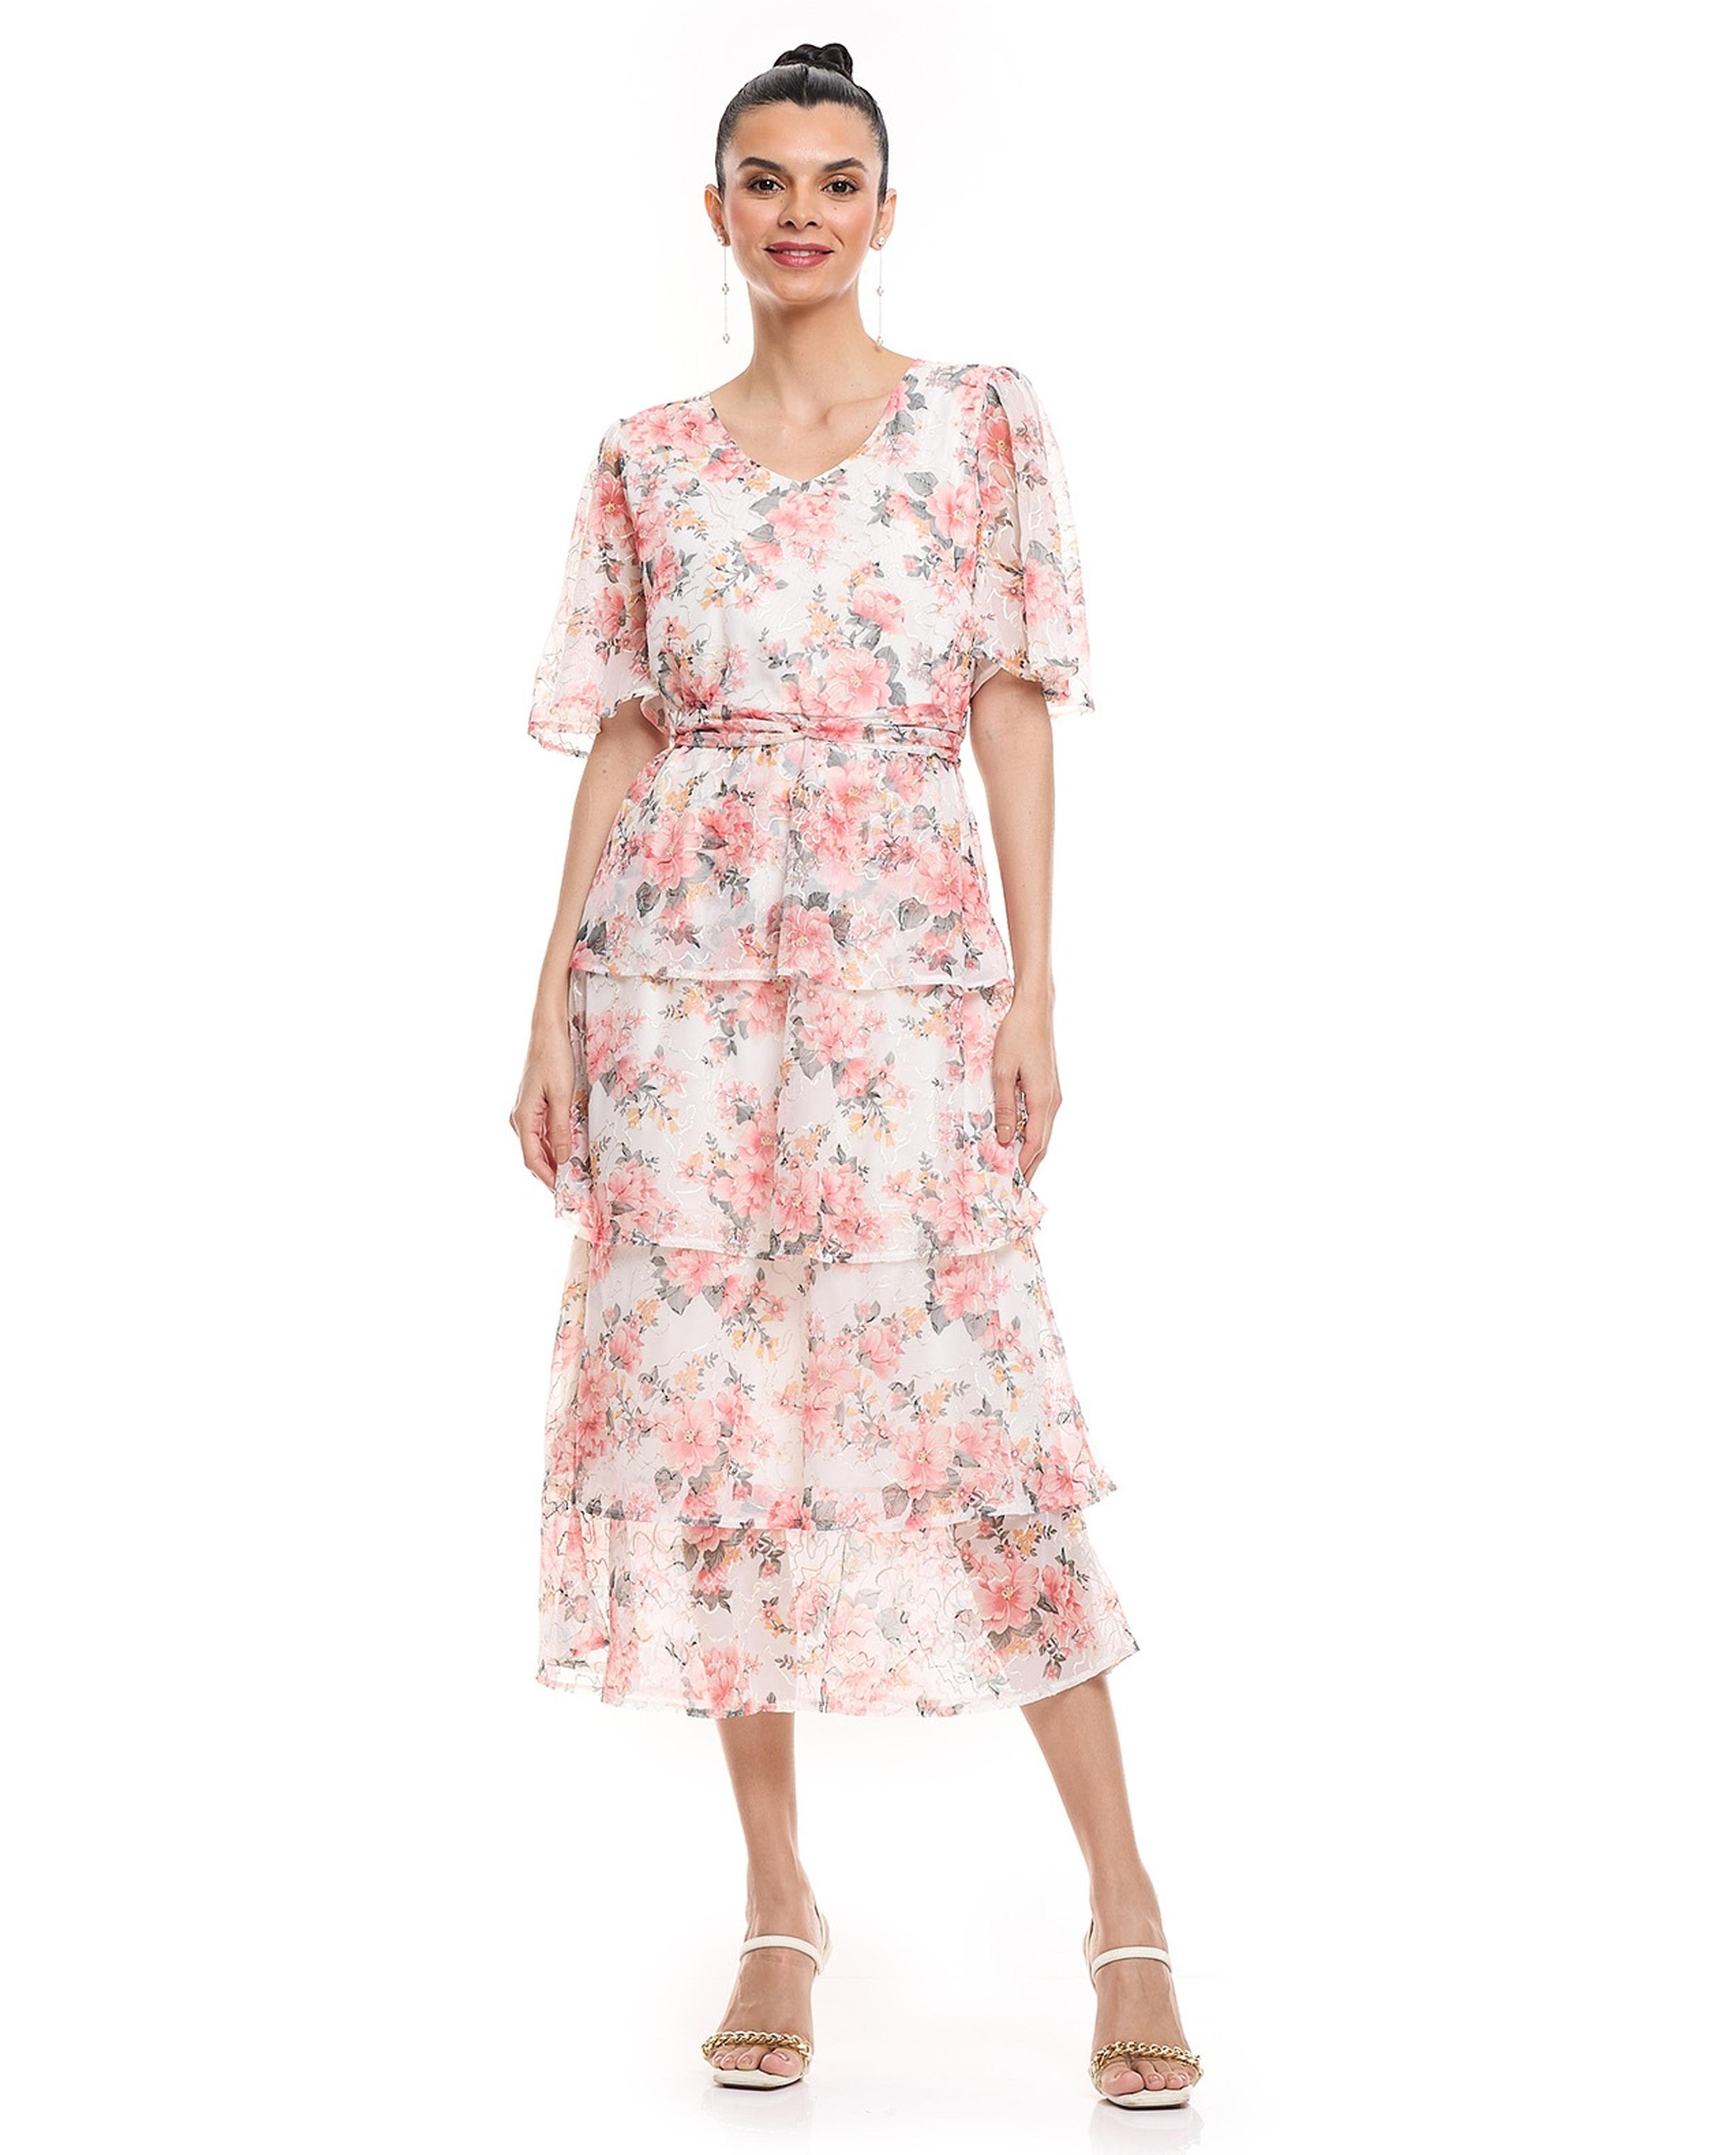 Embroidered Layered Dress with V-Neck and Flutter Sleeves